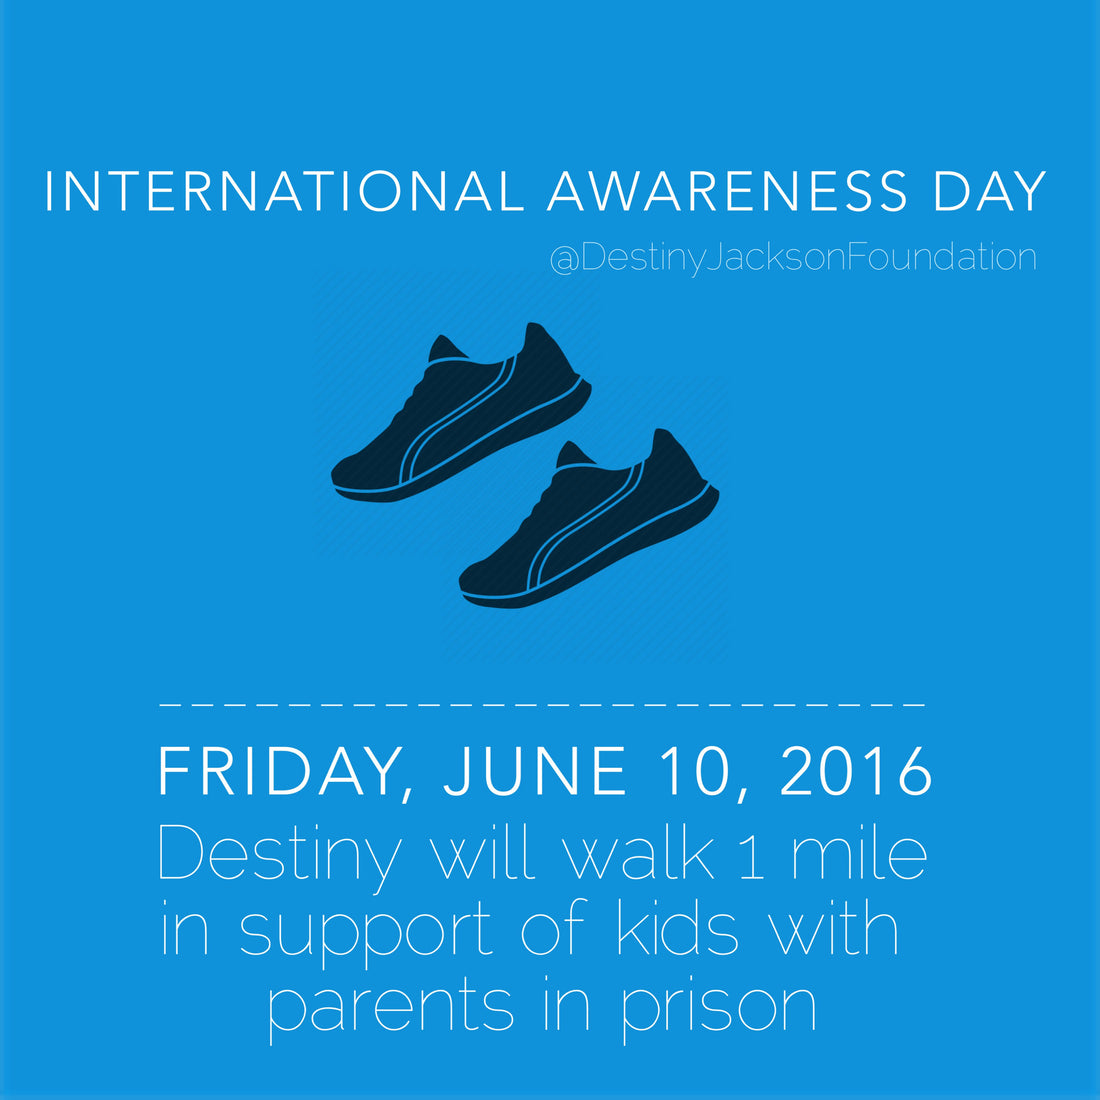 Press Release: Destiny Jackson to Walk A Mile on Friday, June 10, 2016—International Awareness Day for Kids of Incarcerated Parents